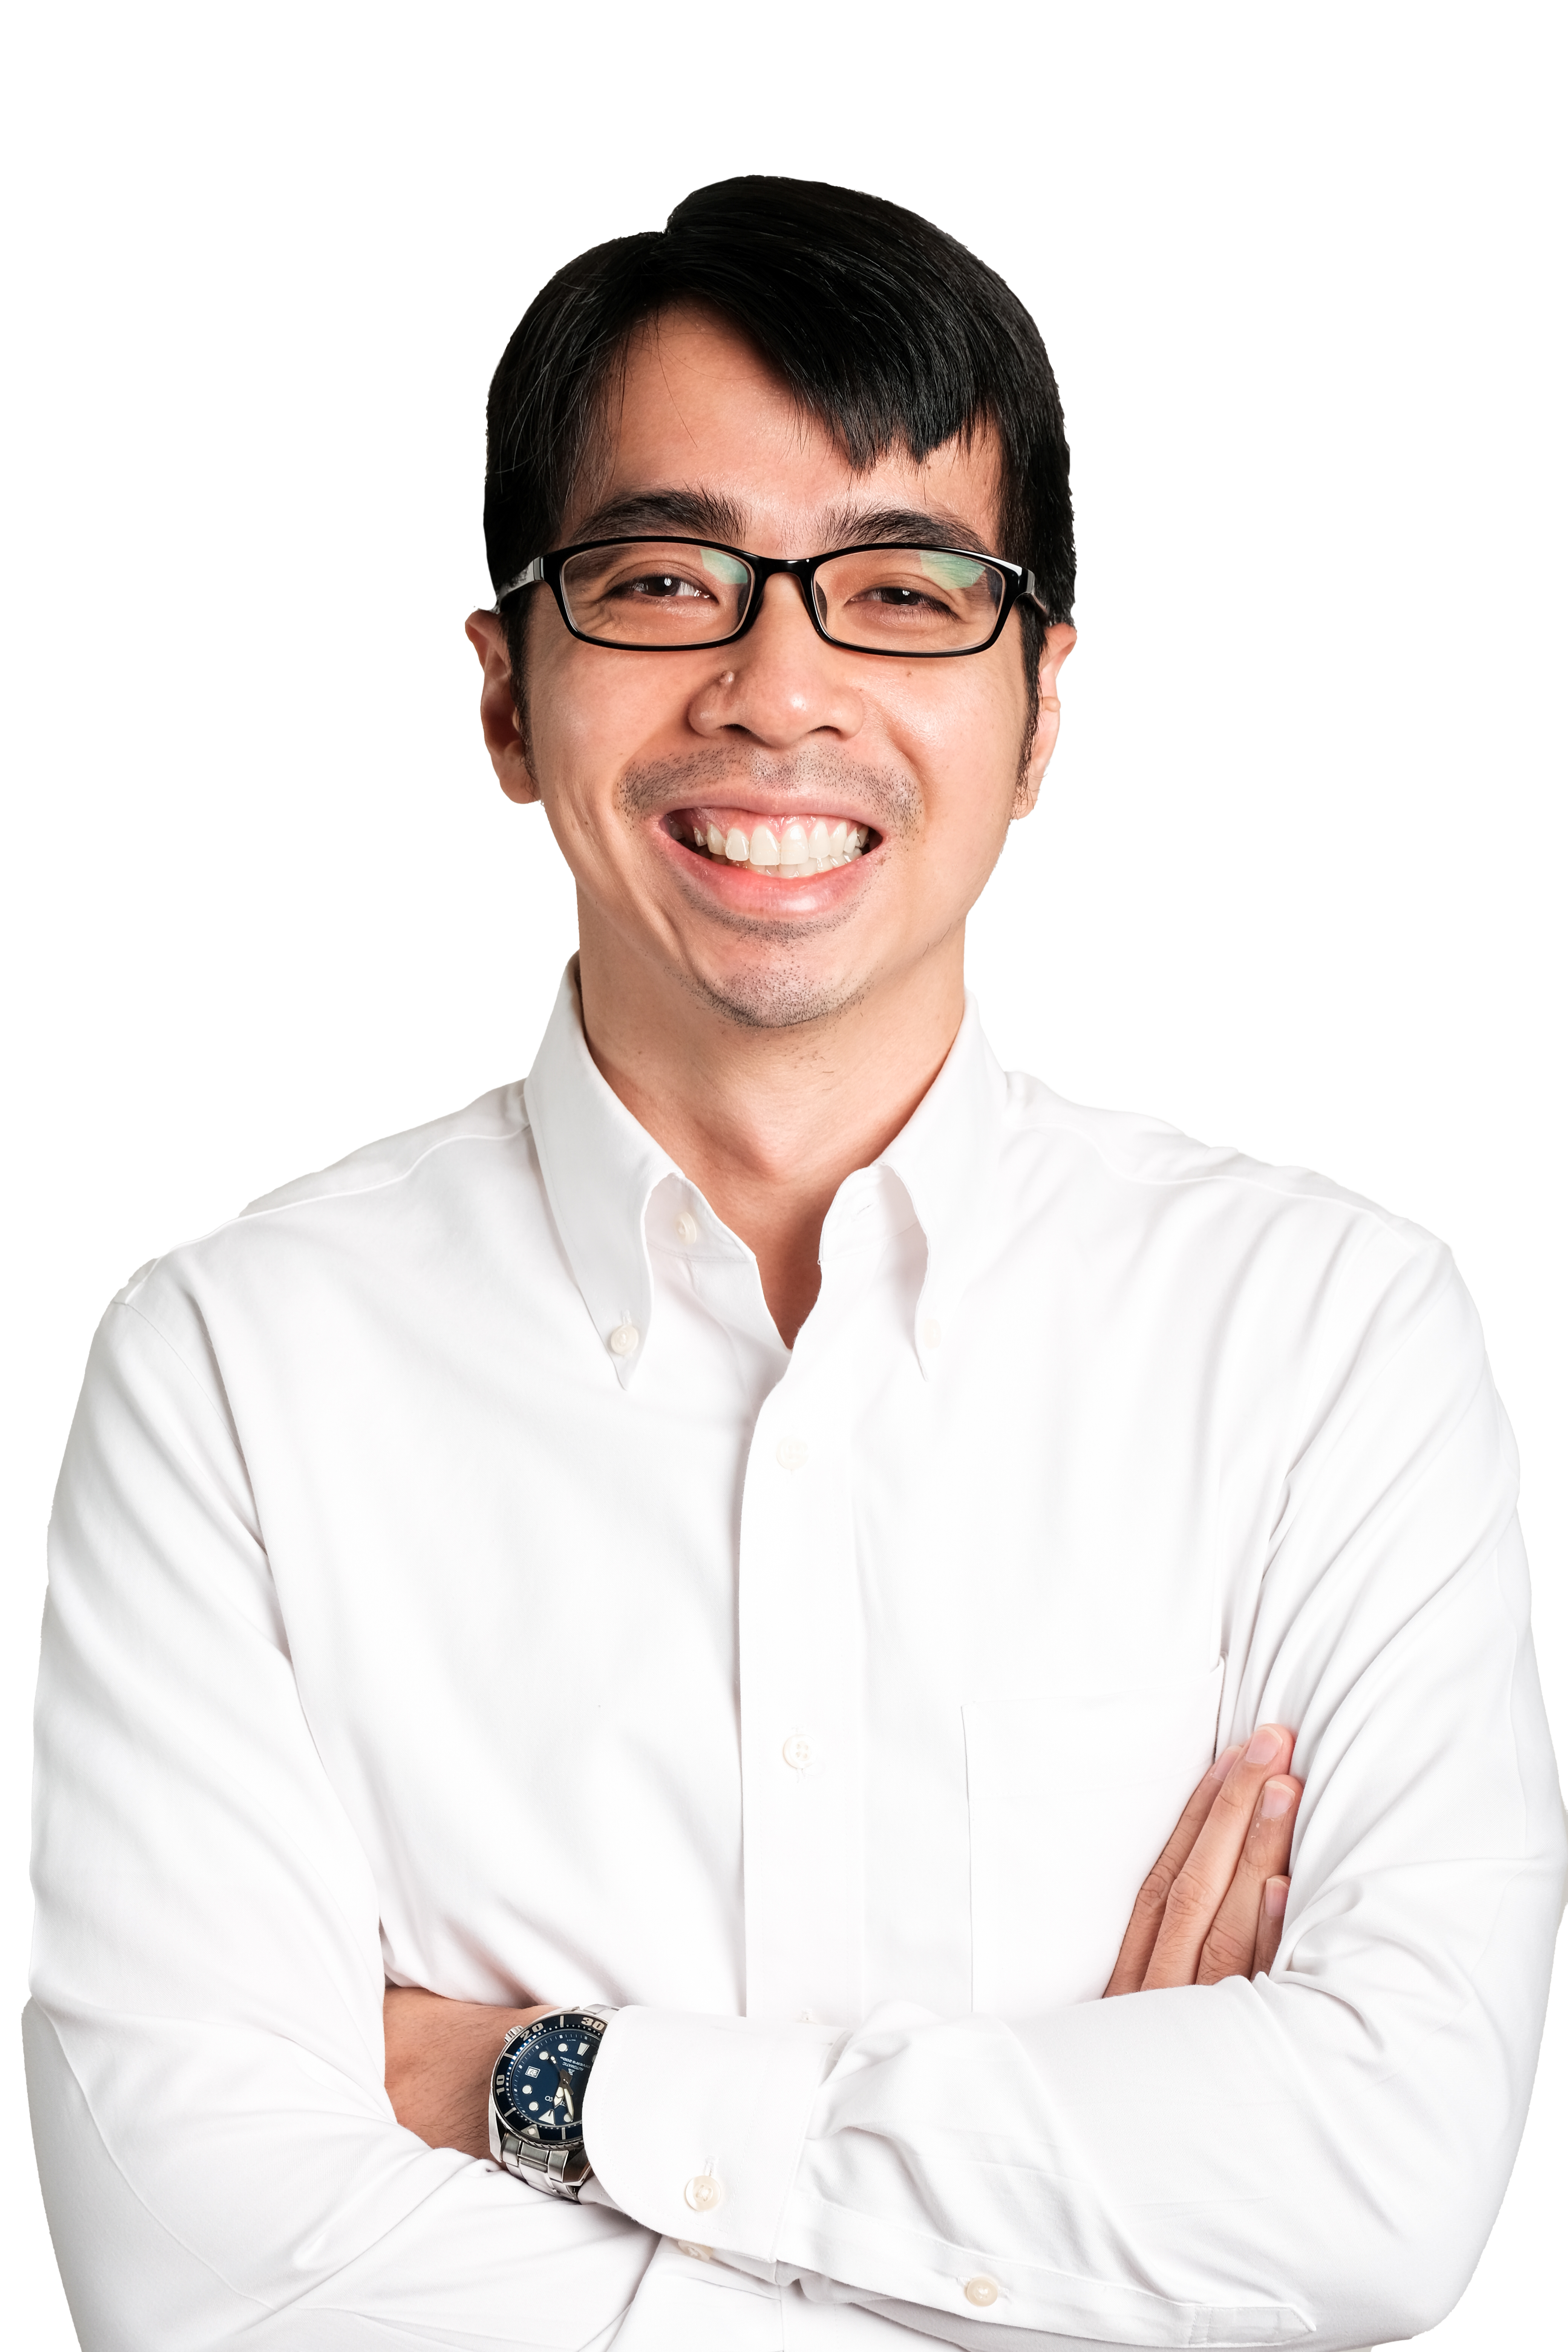 Brian Dy, research manager at Kickstart Ventures